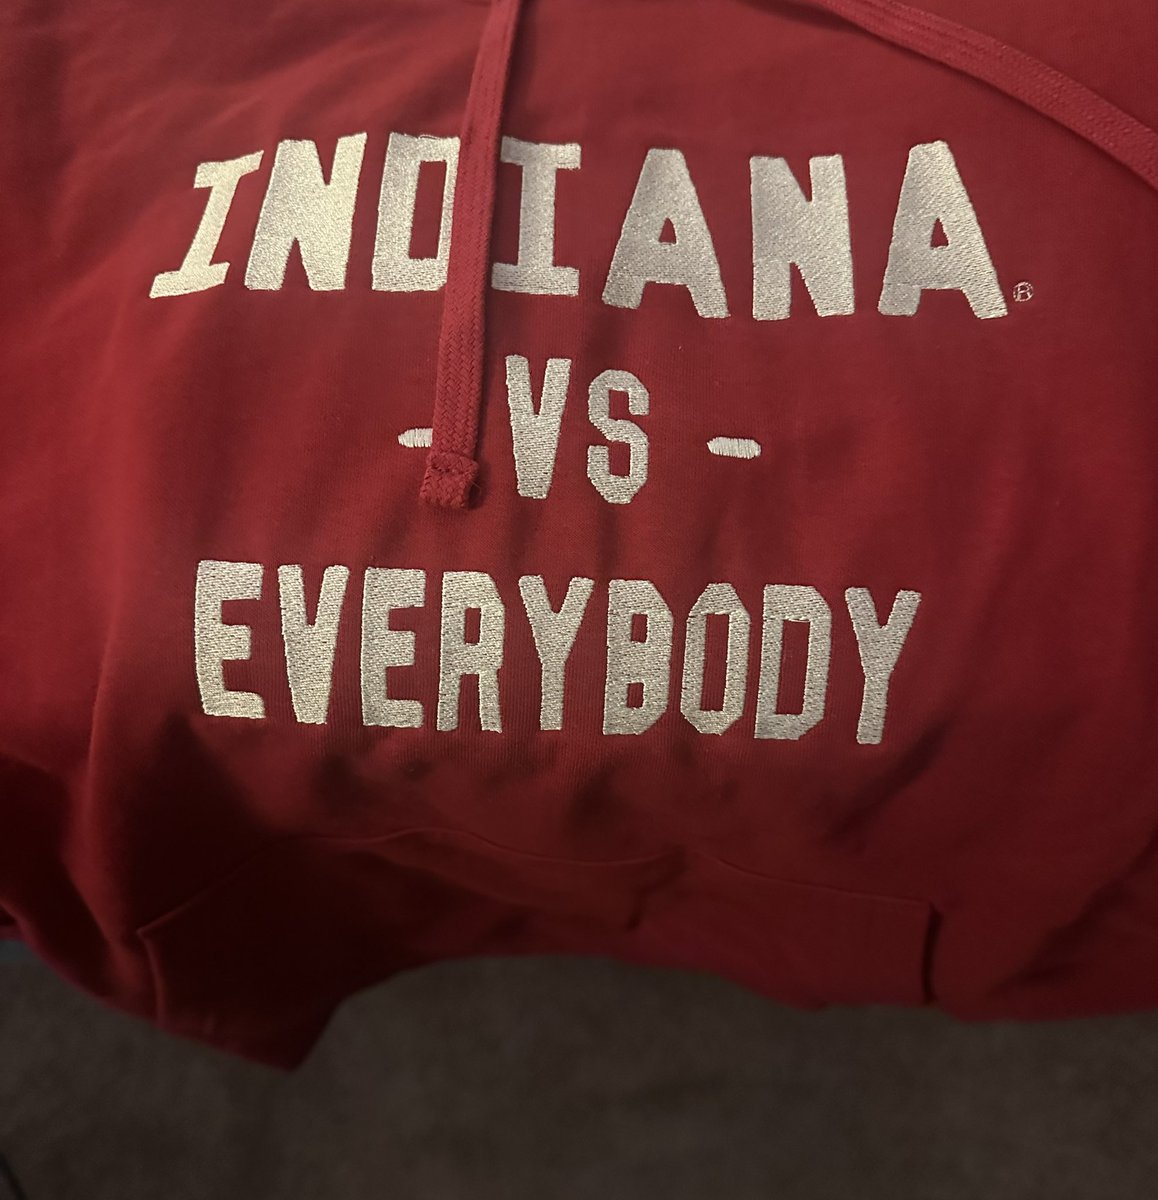 Hoosiers are done, Justin is gone, rough weekend. But a little sunshine today: my hoodie by @millerkopp arrived! INDIANA VS EVERYBODY. Love it!!